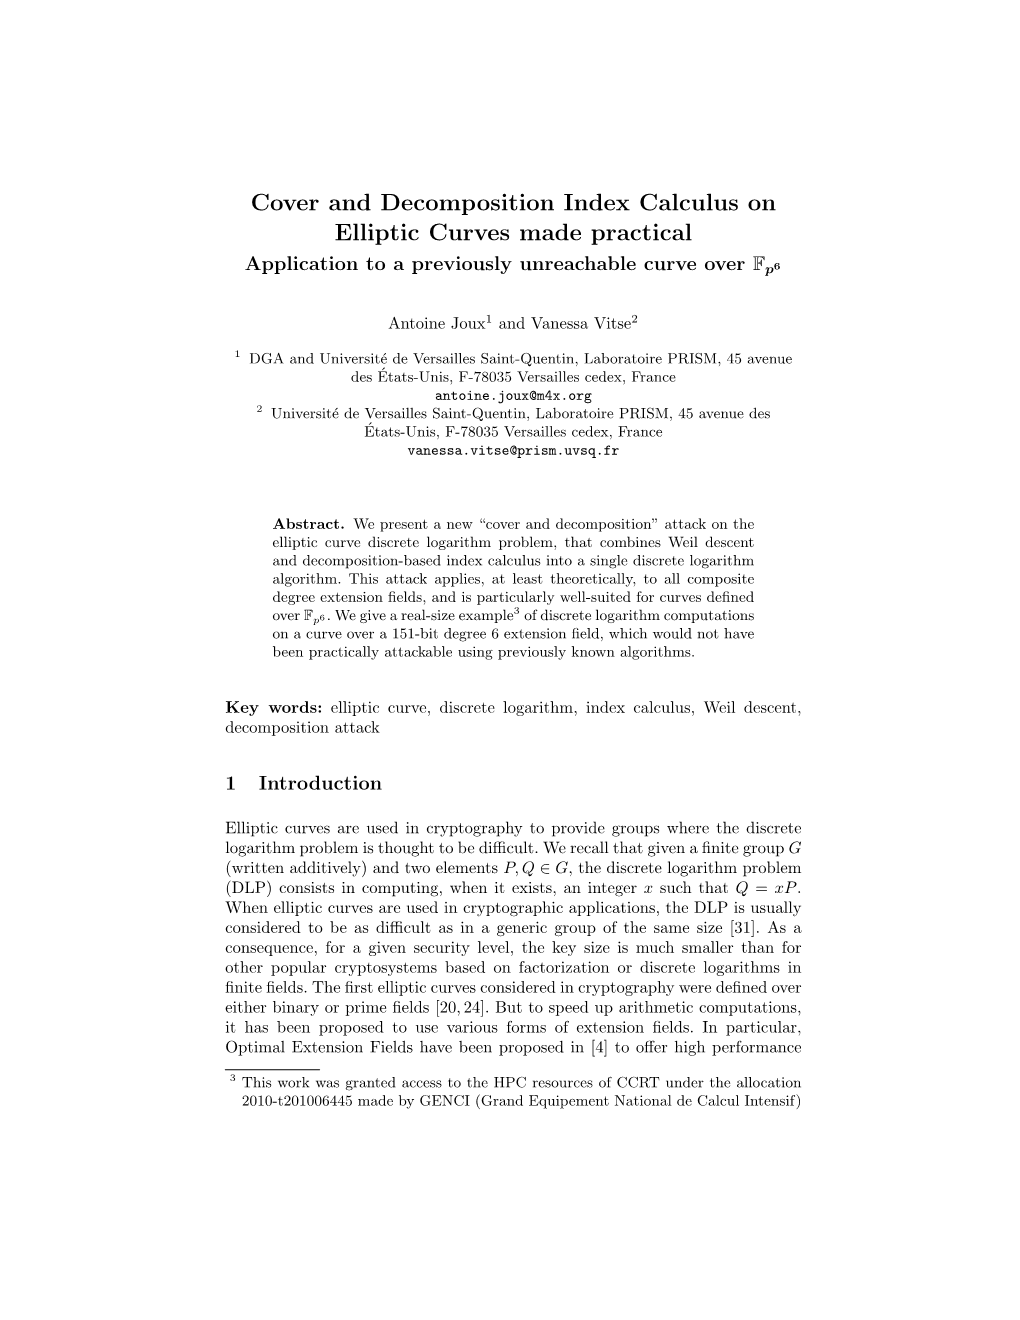 Cover and Decomposition Index Calculus on Elliptic Curves Made Practical